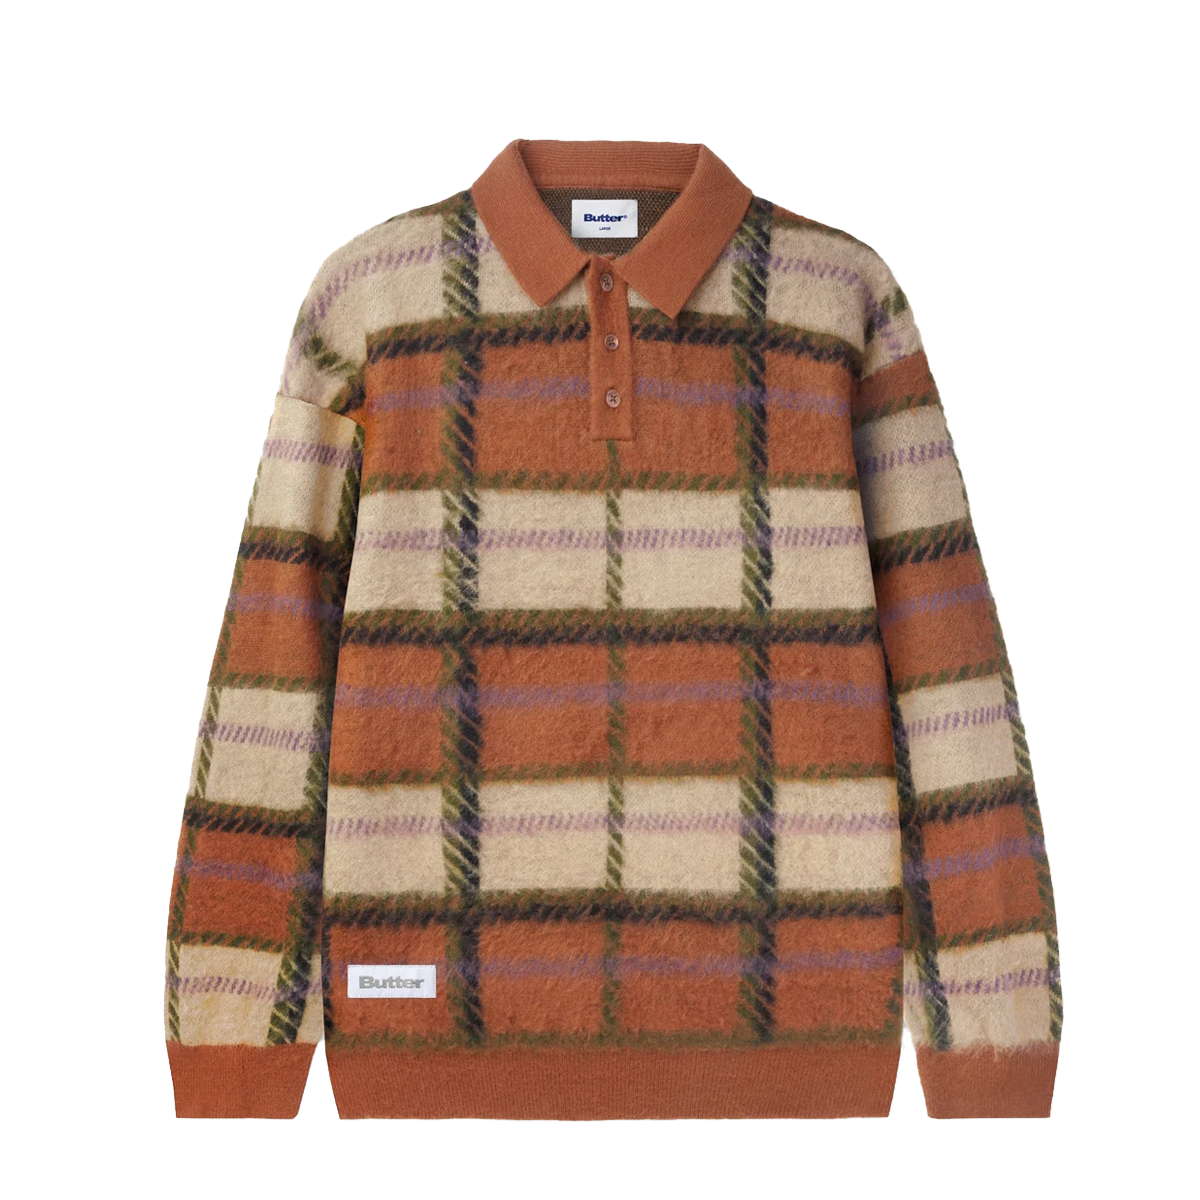 Butter Ivy Button Up Knit Sweater - Brown/Tan